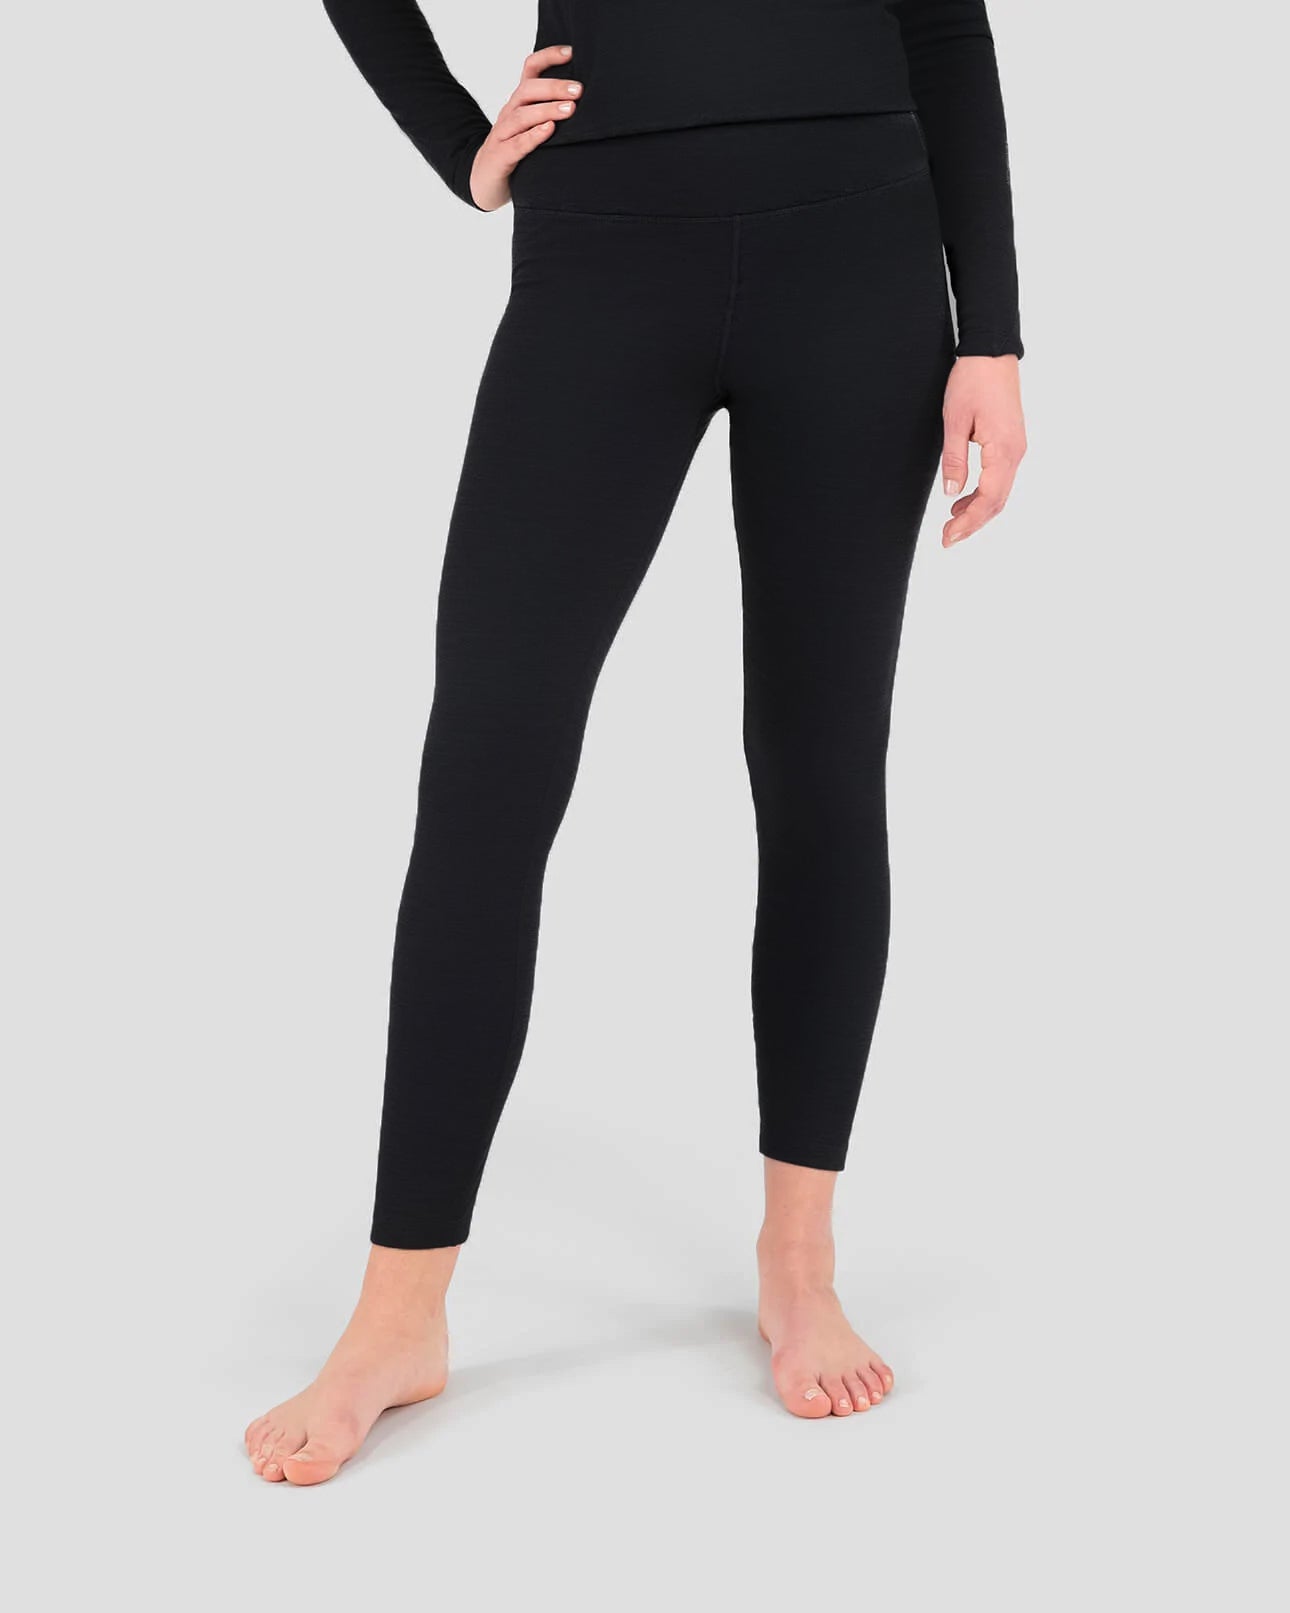 Patagonia Capilene Thermal Weight Bottoms - Women's Review | Tested by  GearLab